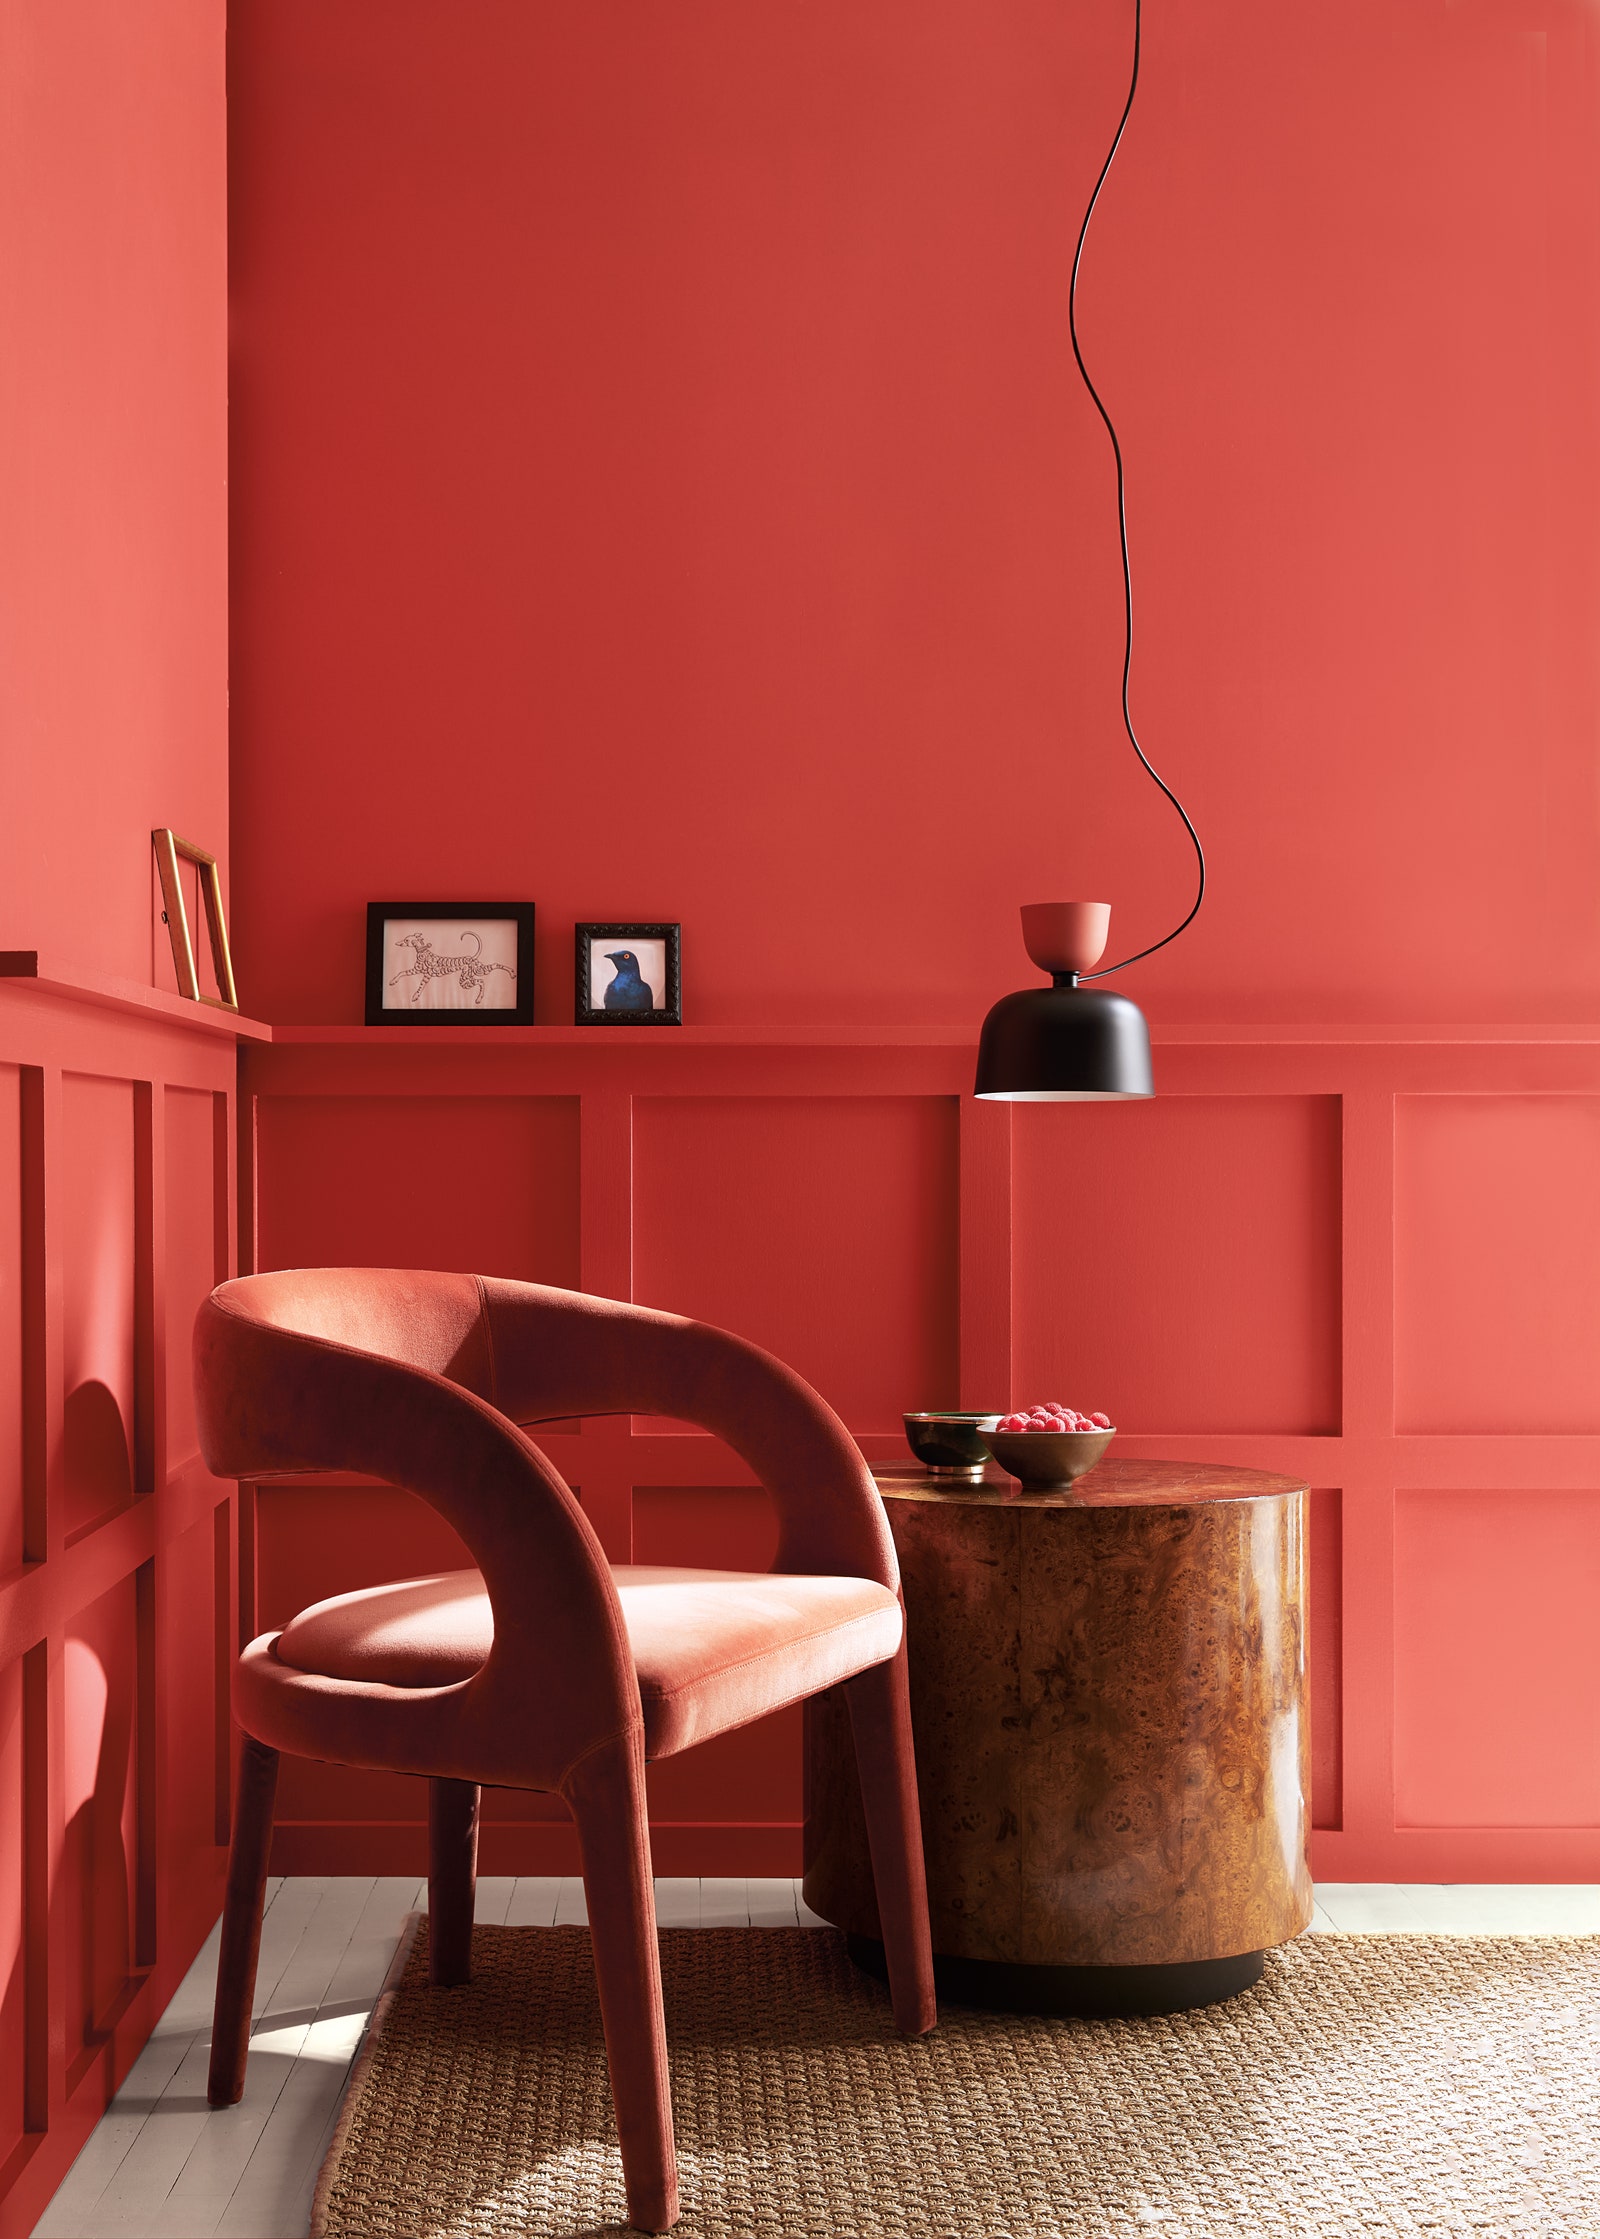 A vignette in a room painted in Benjamin Moore Color of the Year 2023 Raspberry Blush